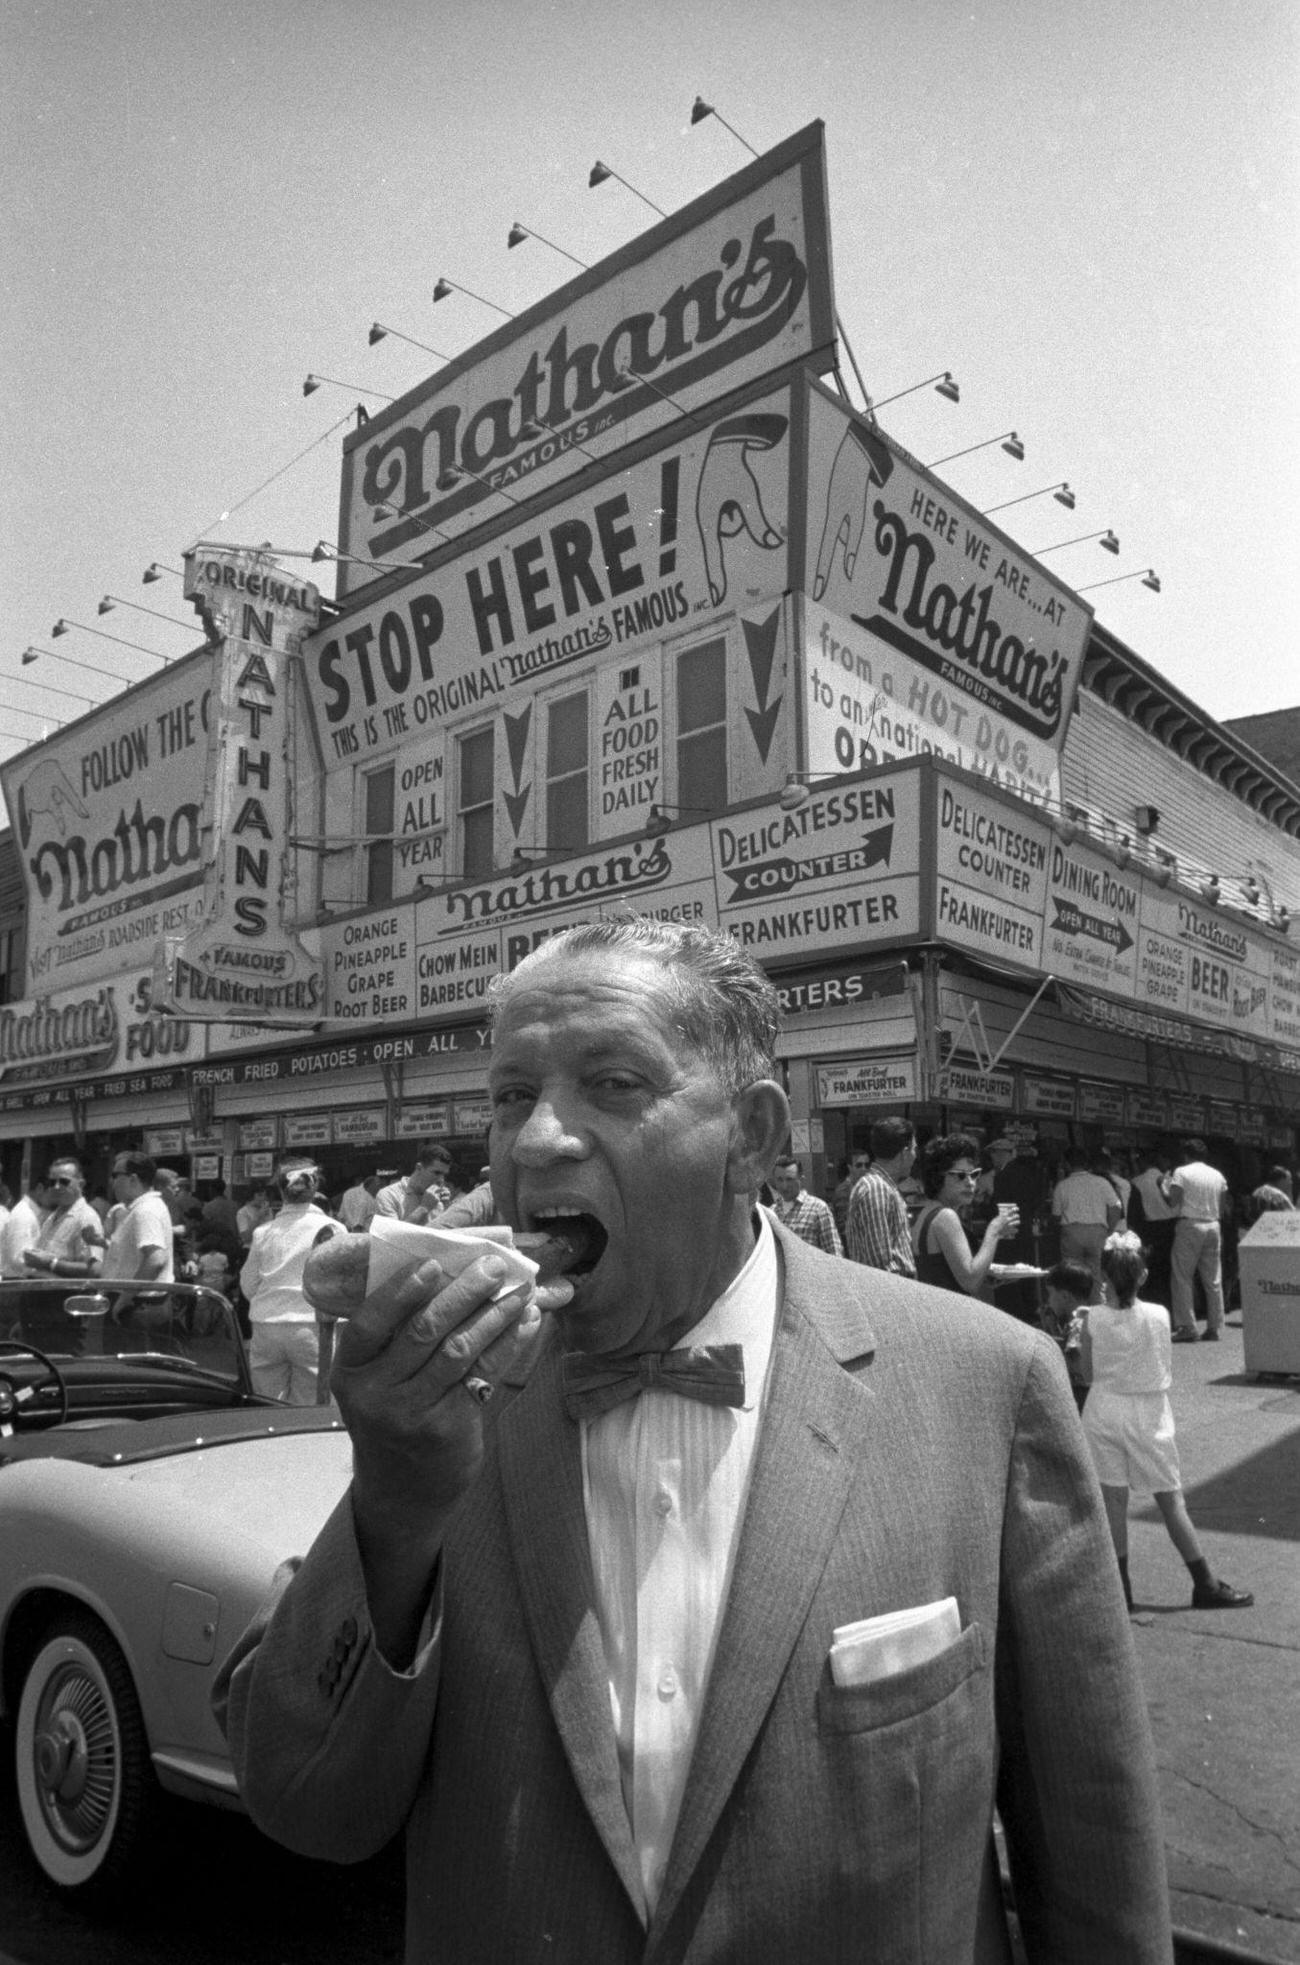 Nathan Handwerker, Founder Of Famous Coney Island Hot Dog Stand, 1960